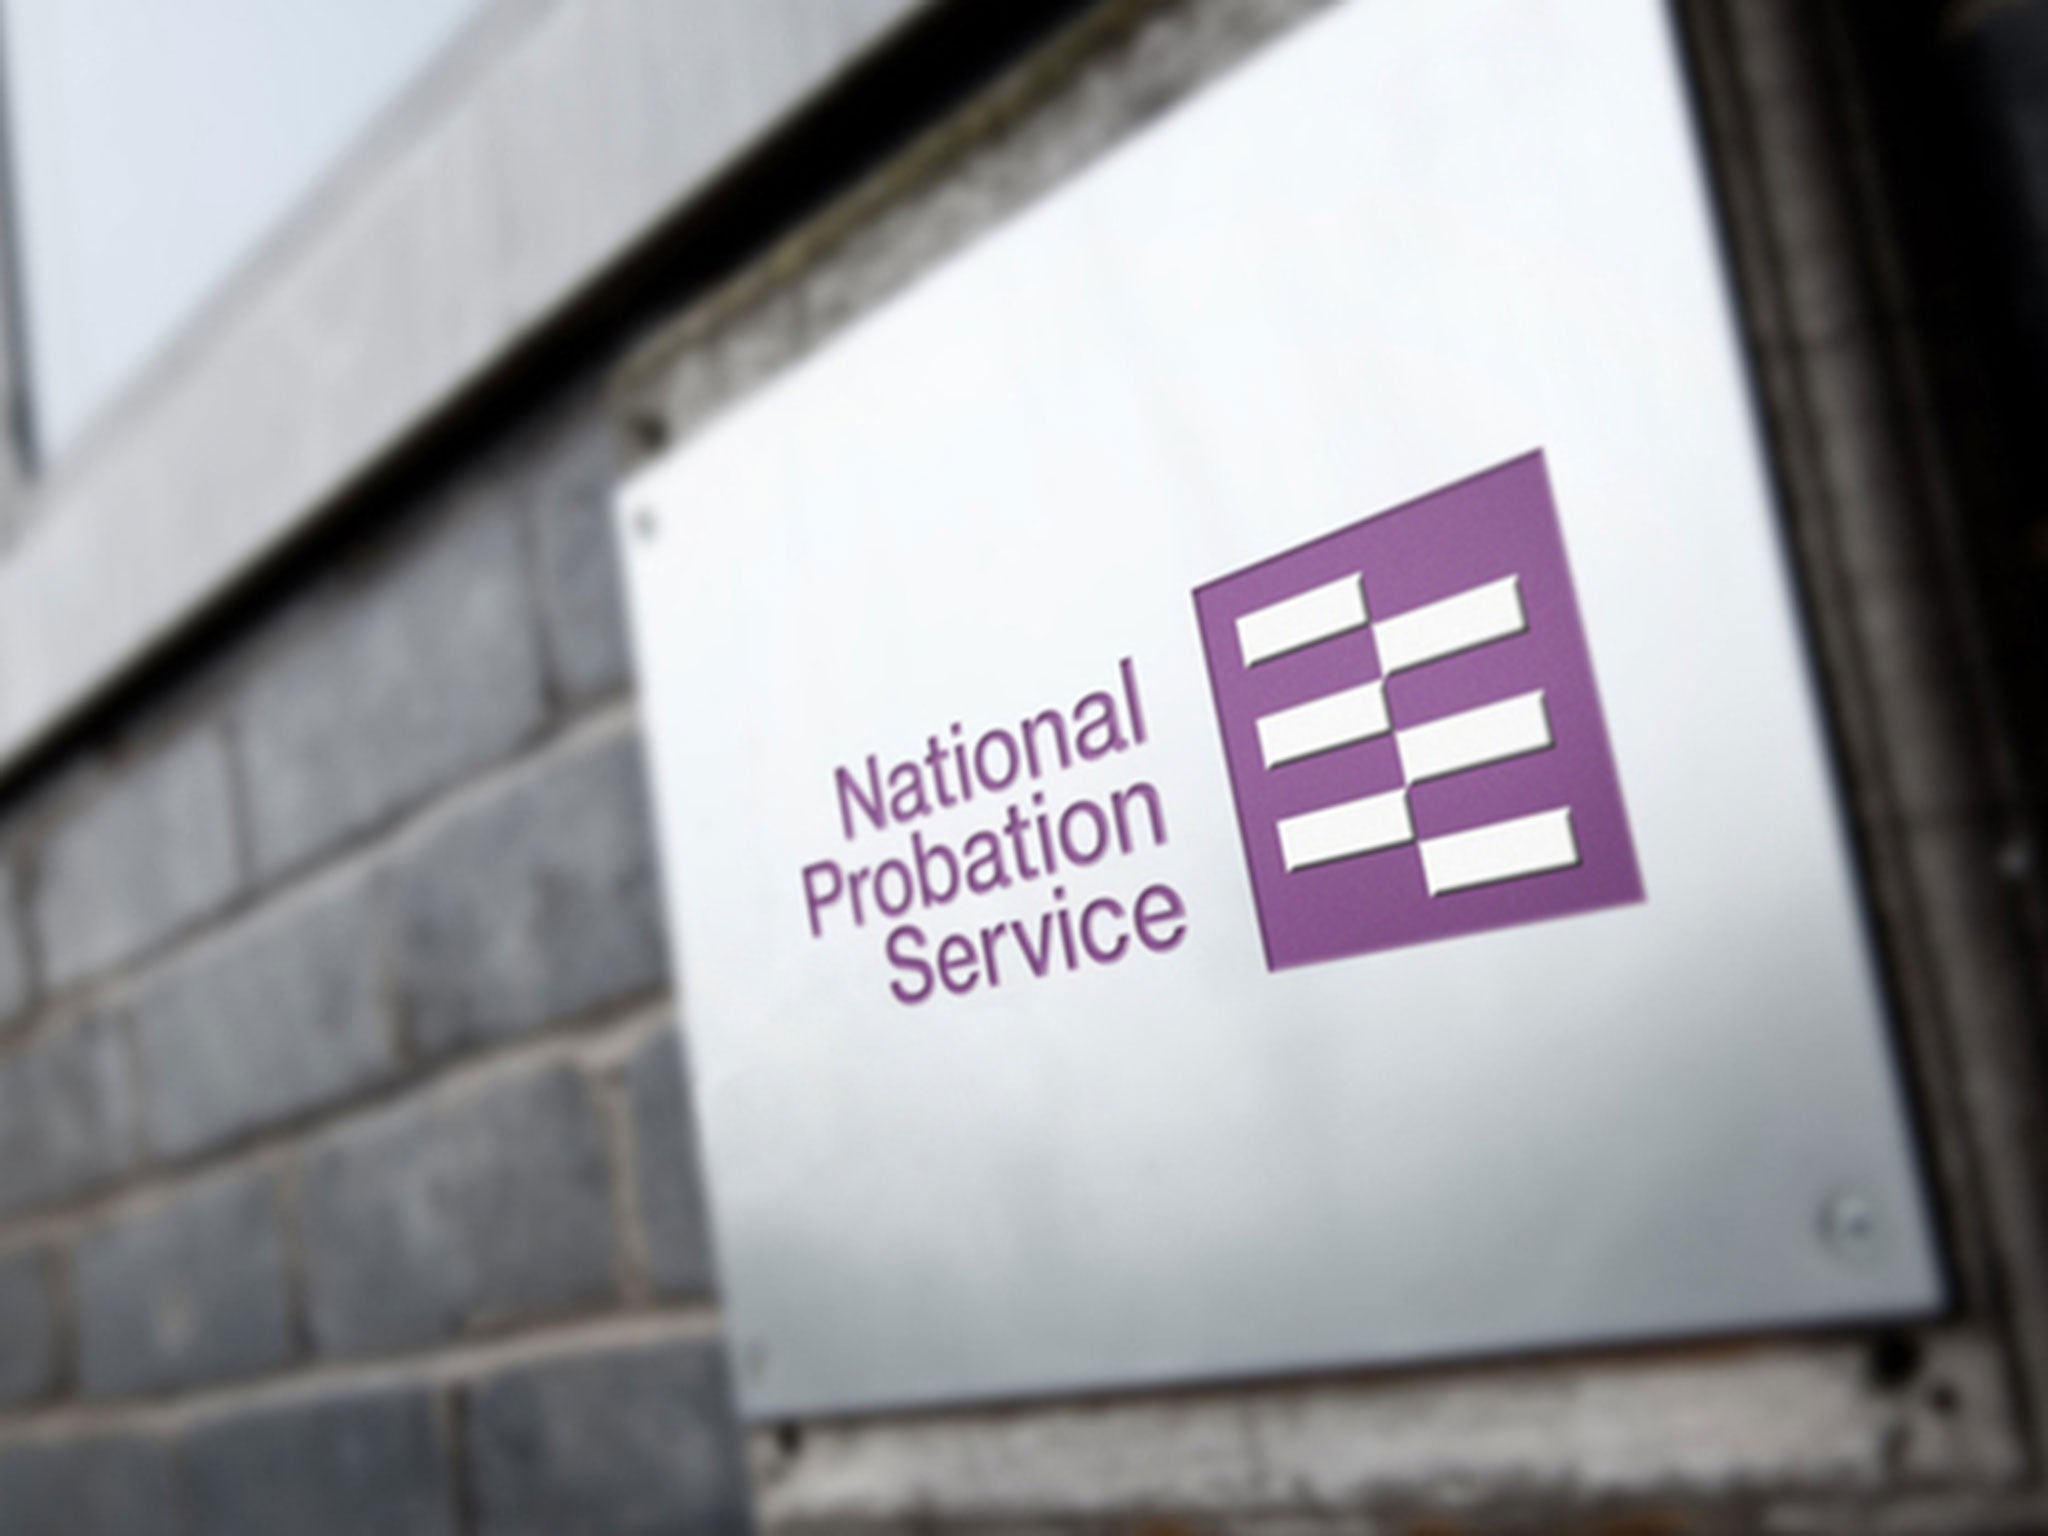 The National Probation Service was split in 2014, with some 70 per cent of its work outsourced to private companies